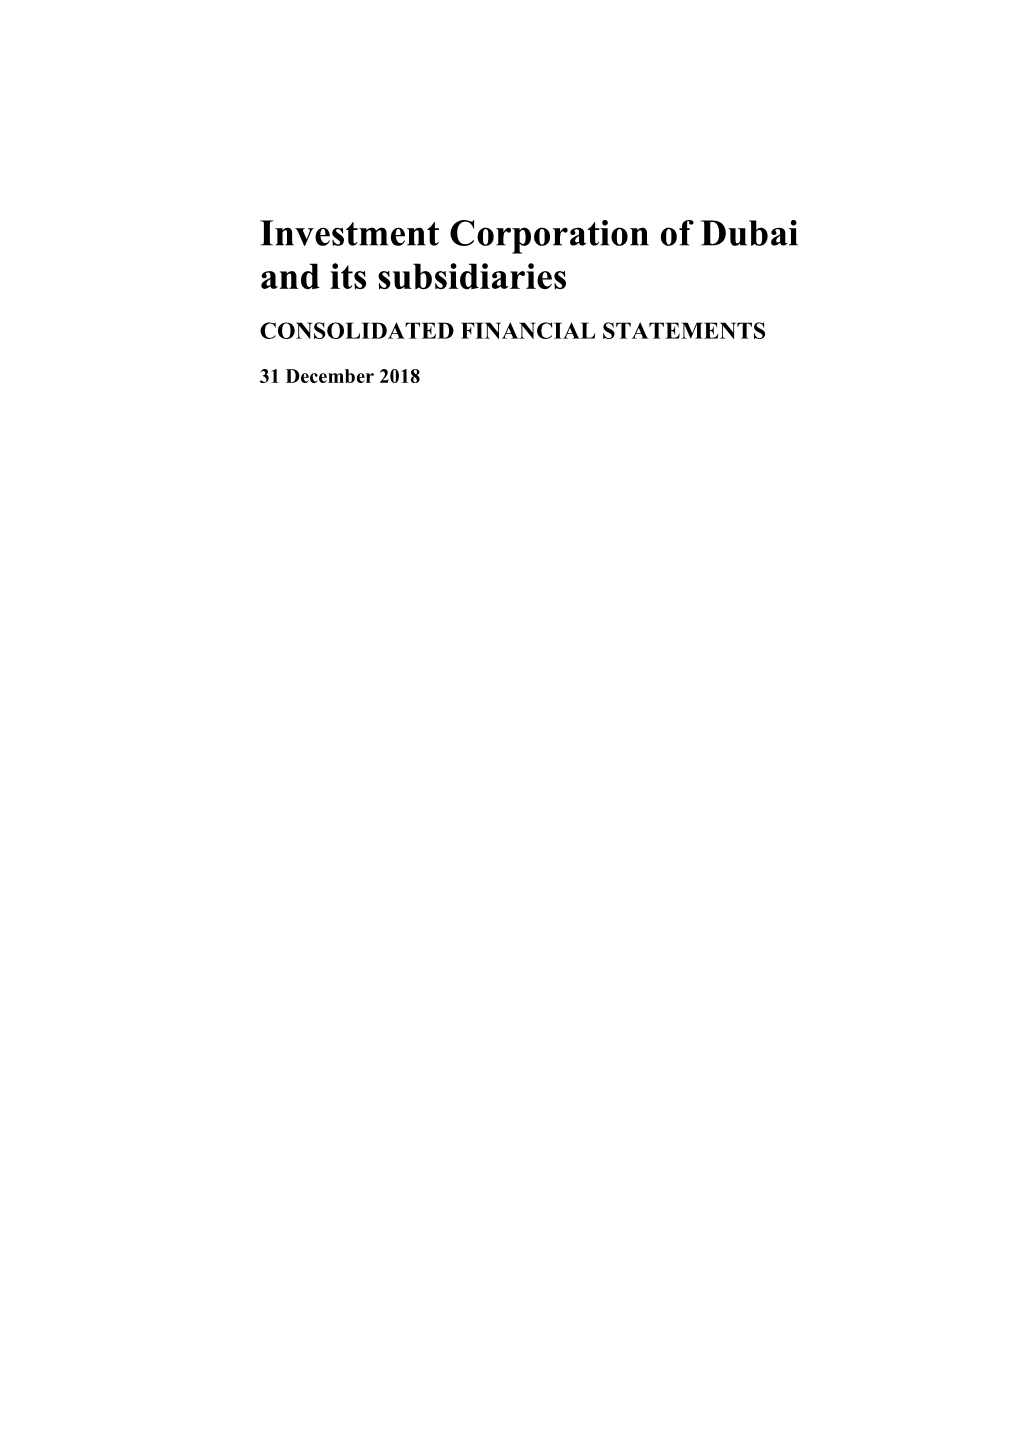 Investment Corporation of Dubai and Its Subsidiaries